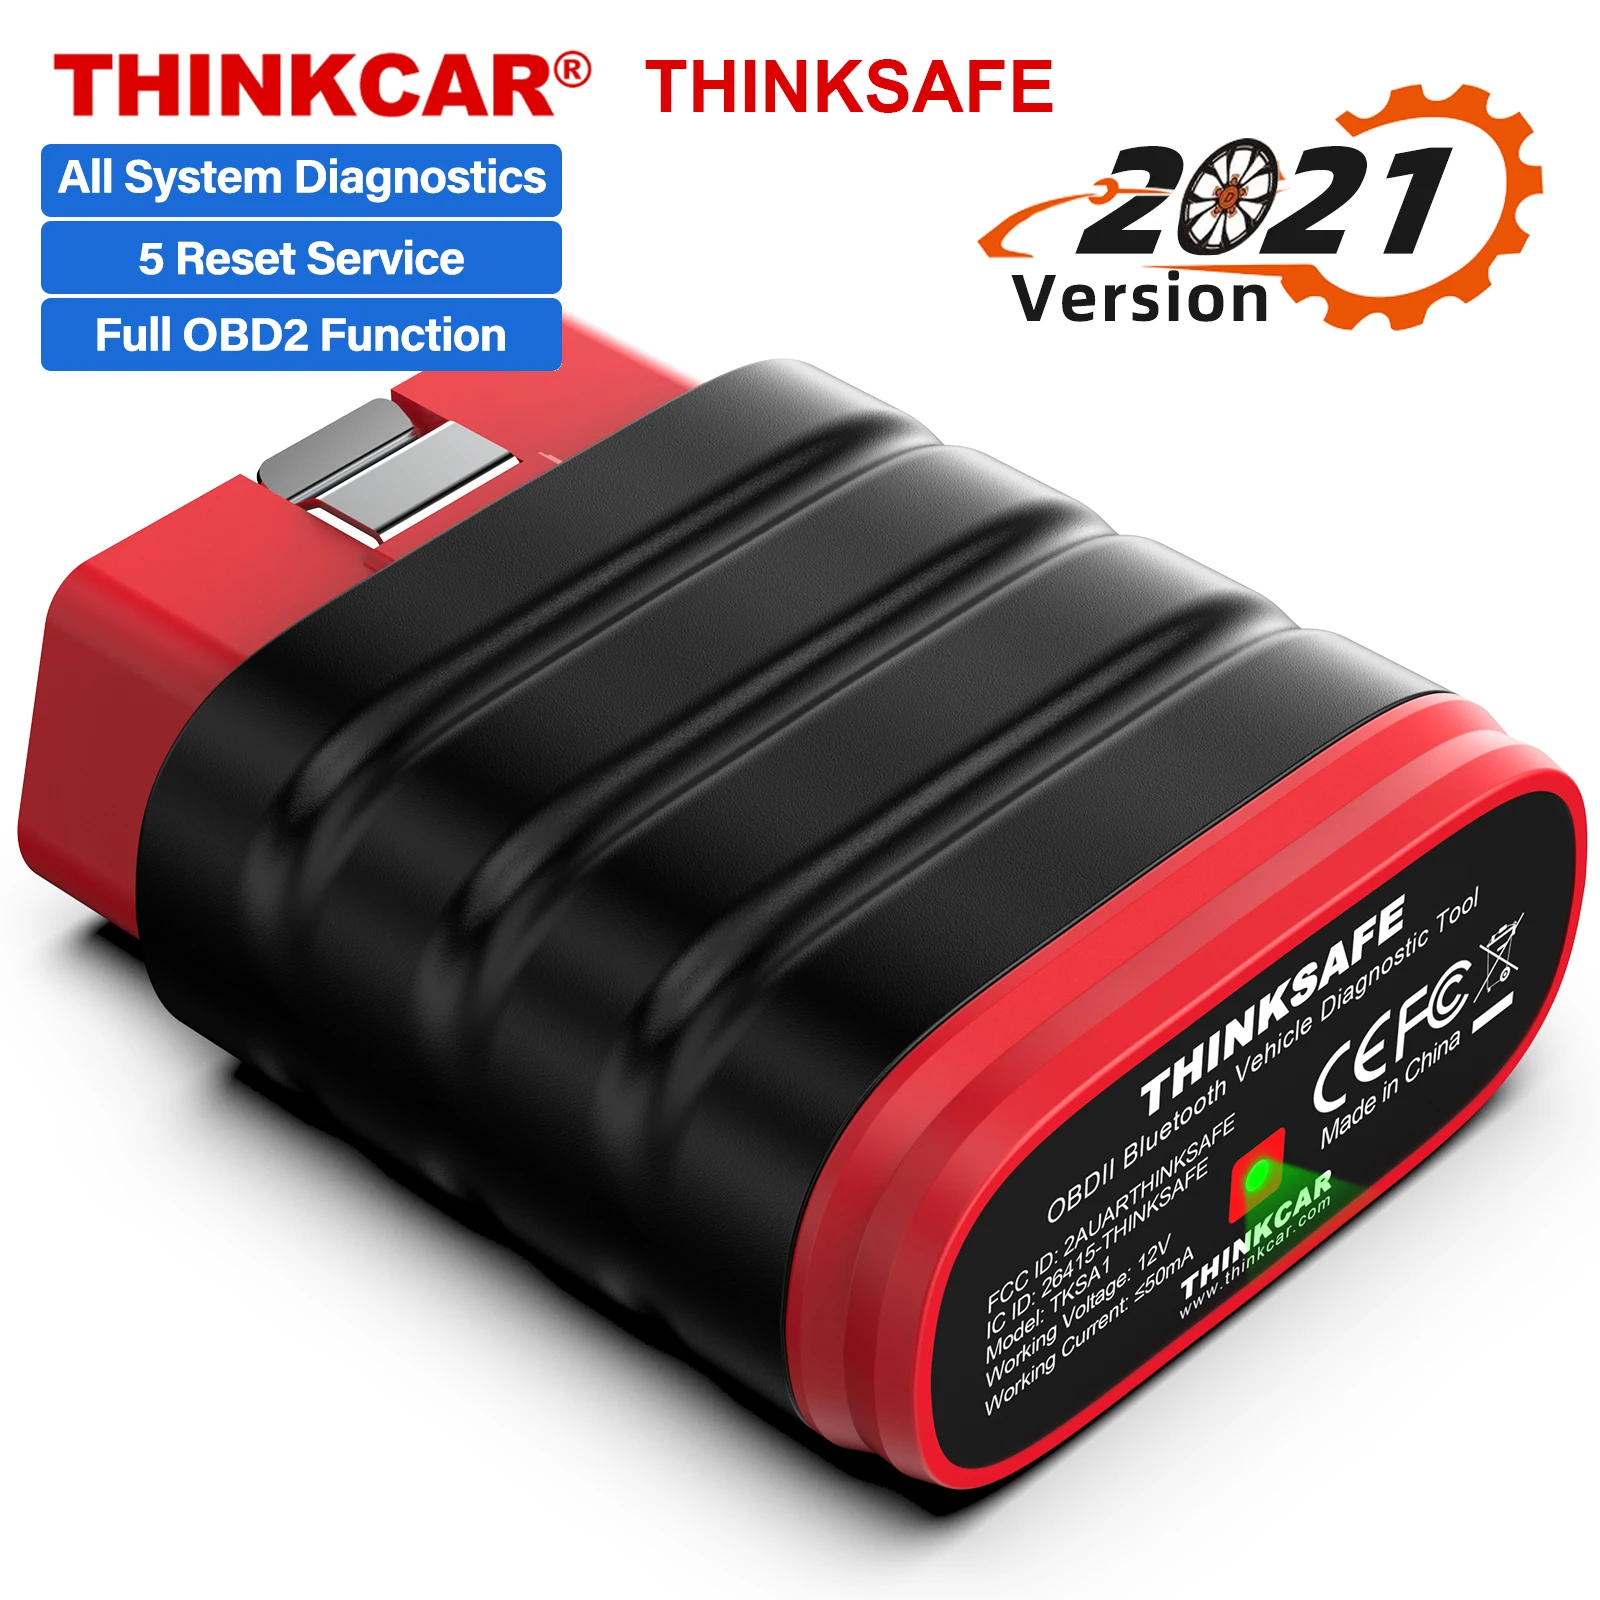 

Thinkcar ThinkSafe OBD2 Scanner Full System ABS OIL EPB TPMS SAS Reset OBD 2 Code Reader For Android IOS Car Diagnostic Tools